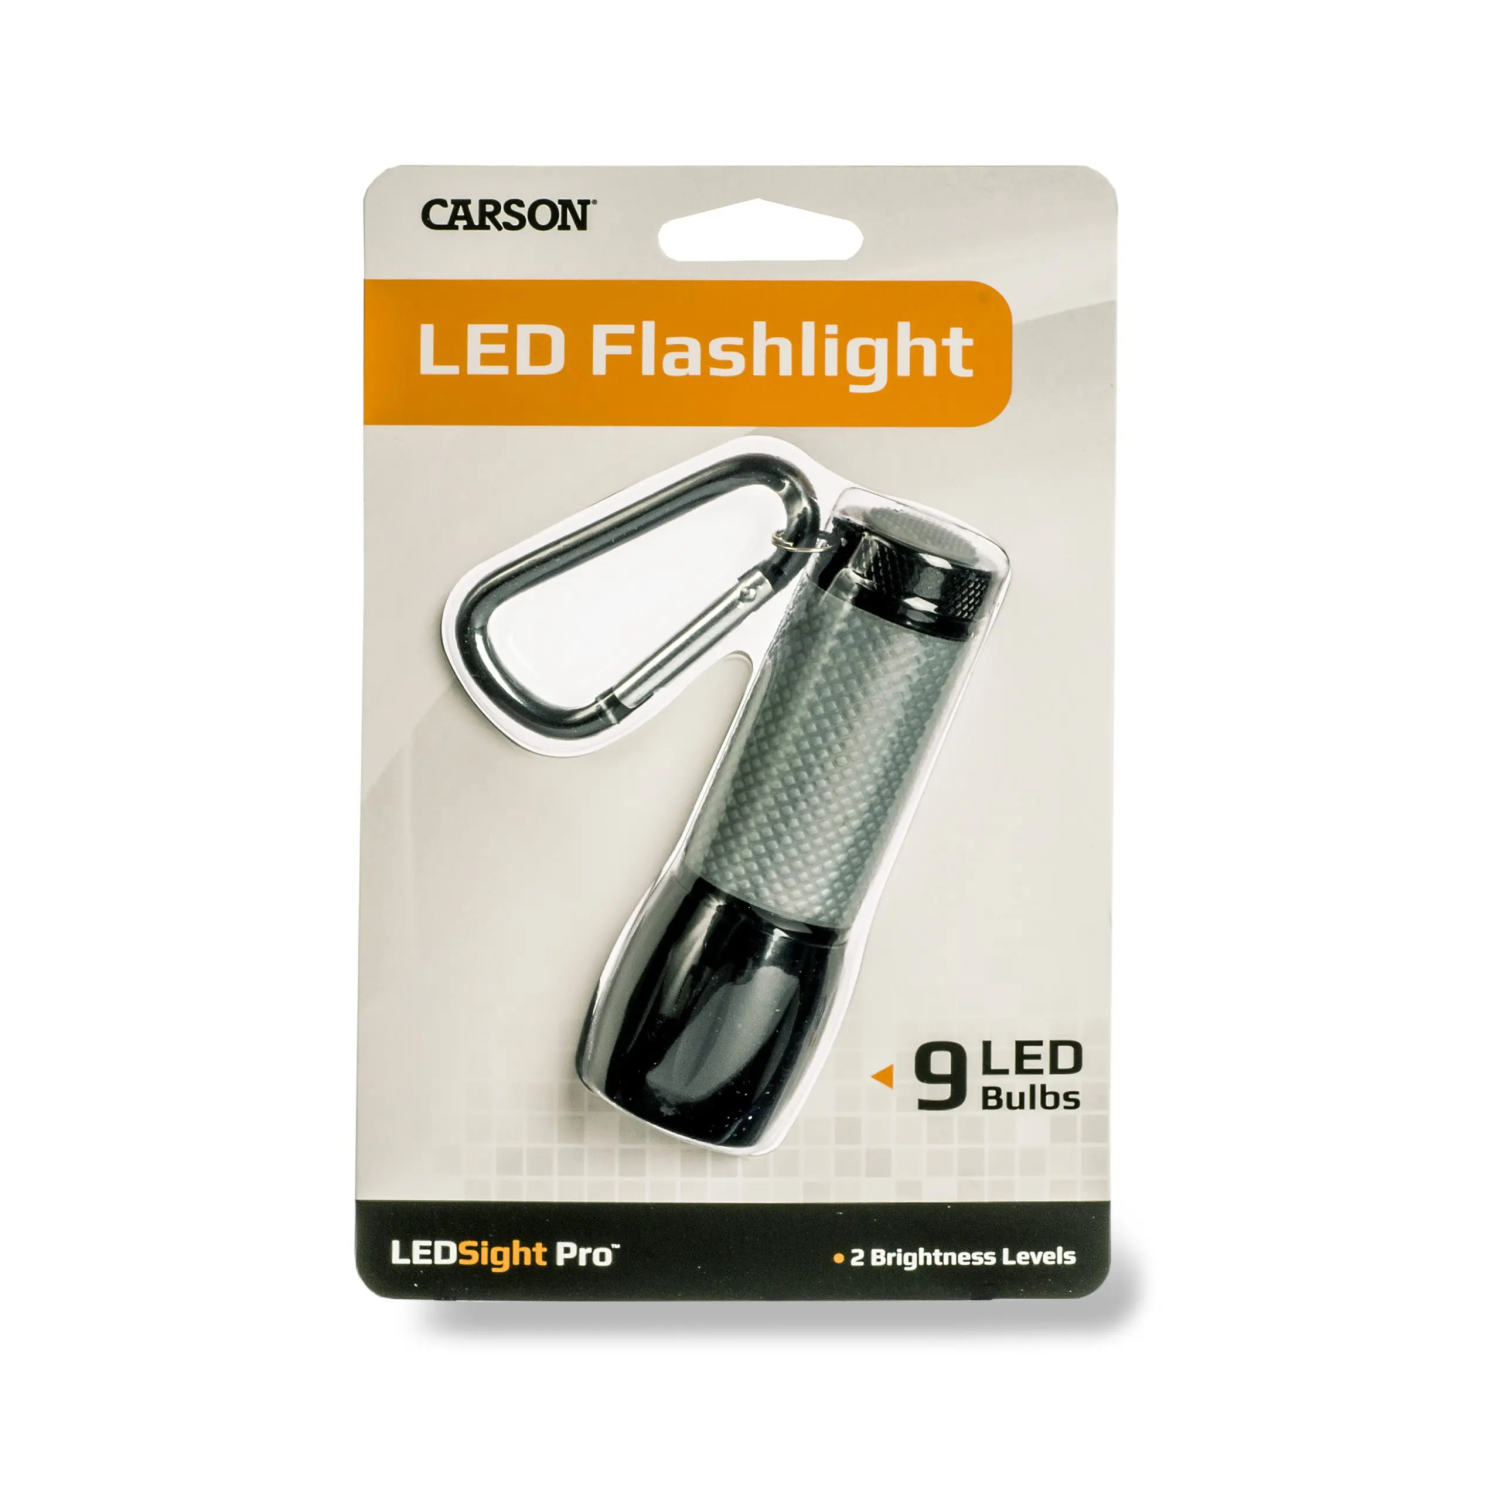 Image of the packaging that the SL-55, LEDSight Pro™ Mini LED Flashlight comes in.